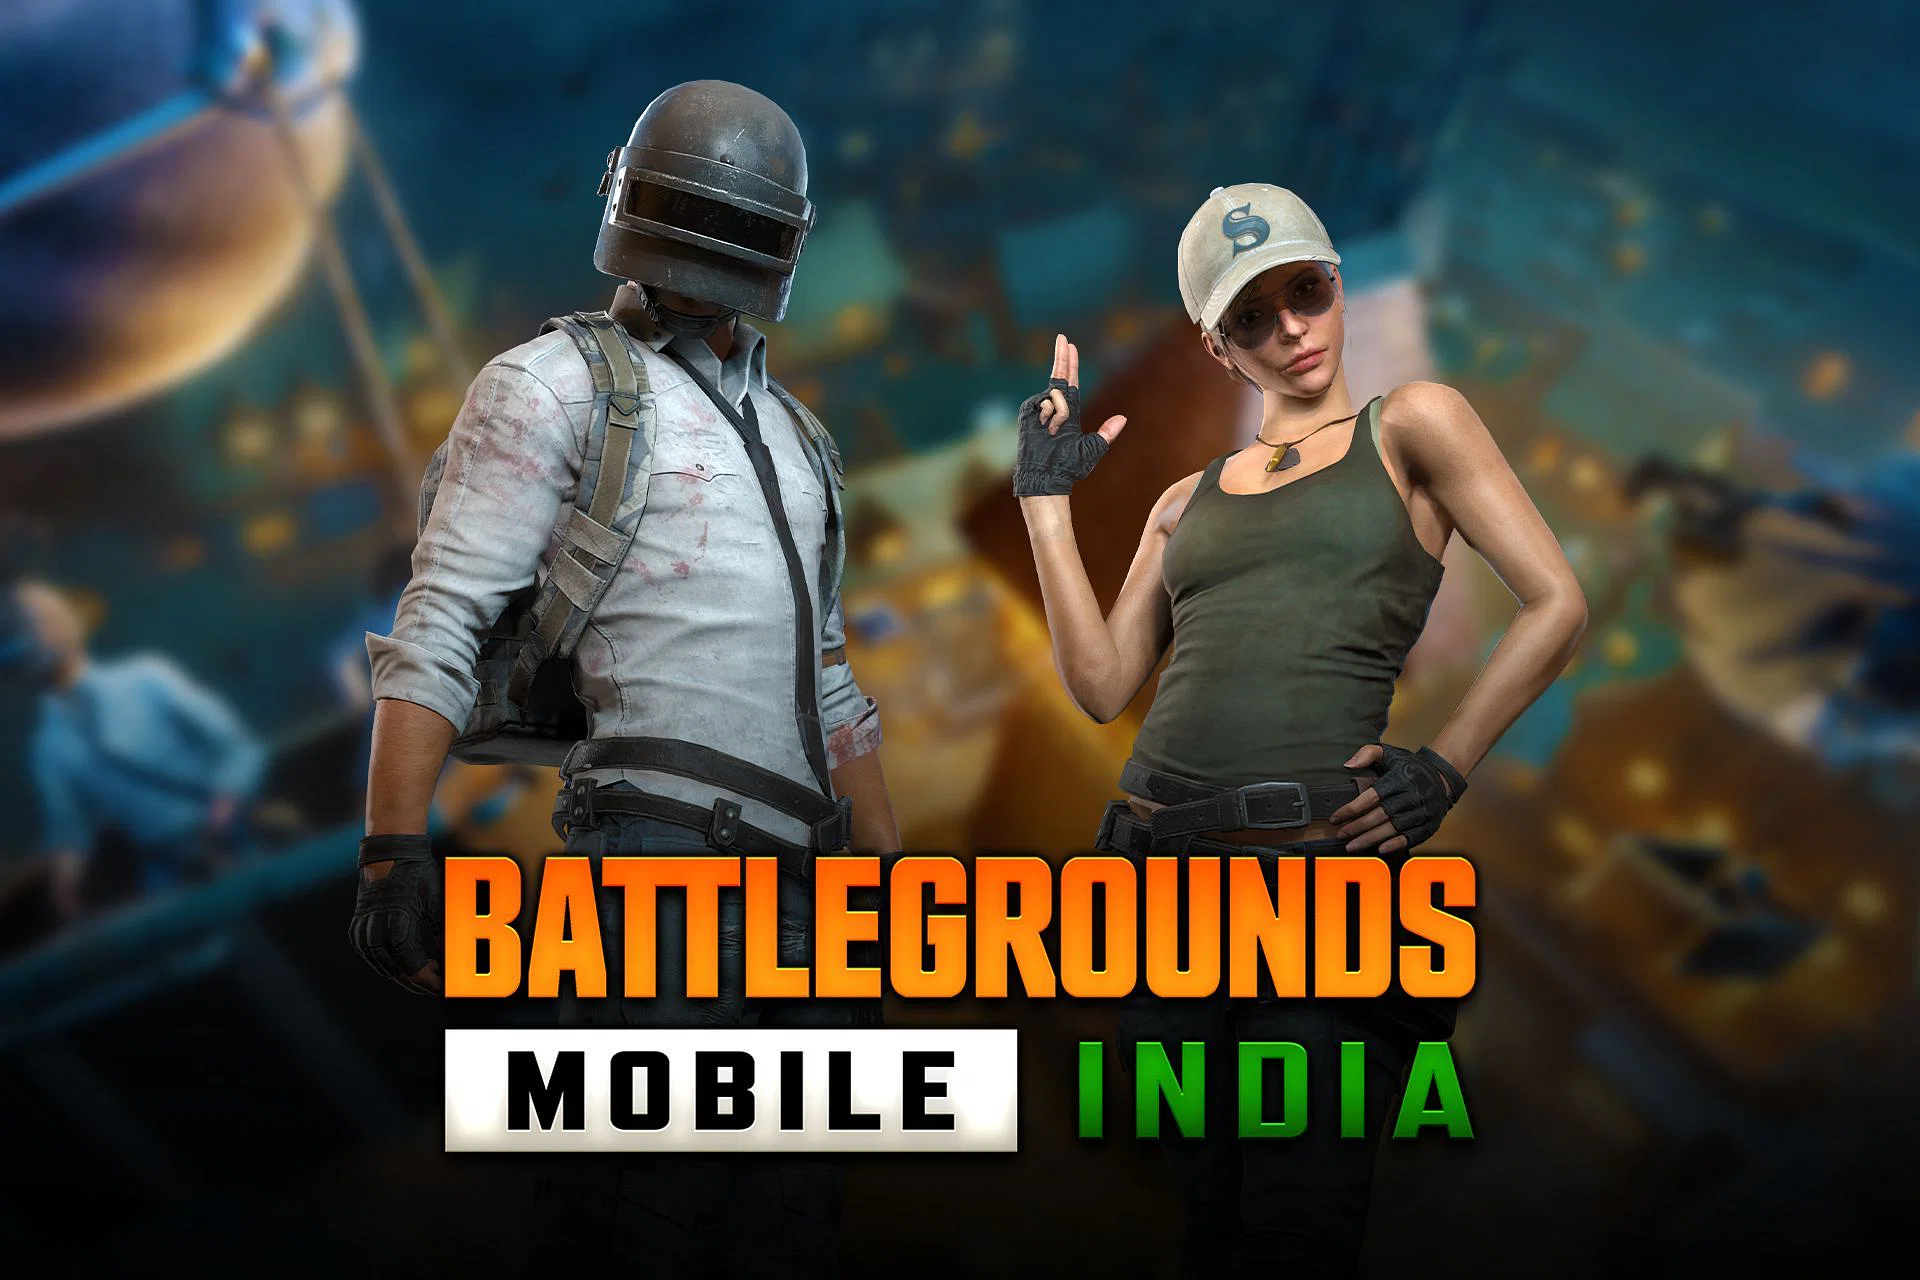 Download failed because you may not have purchased this app pubg mobile что делать фото 19